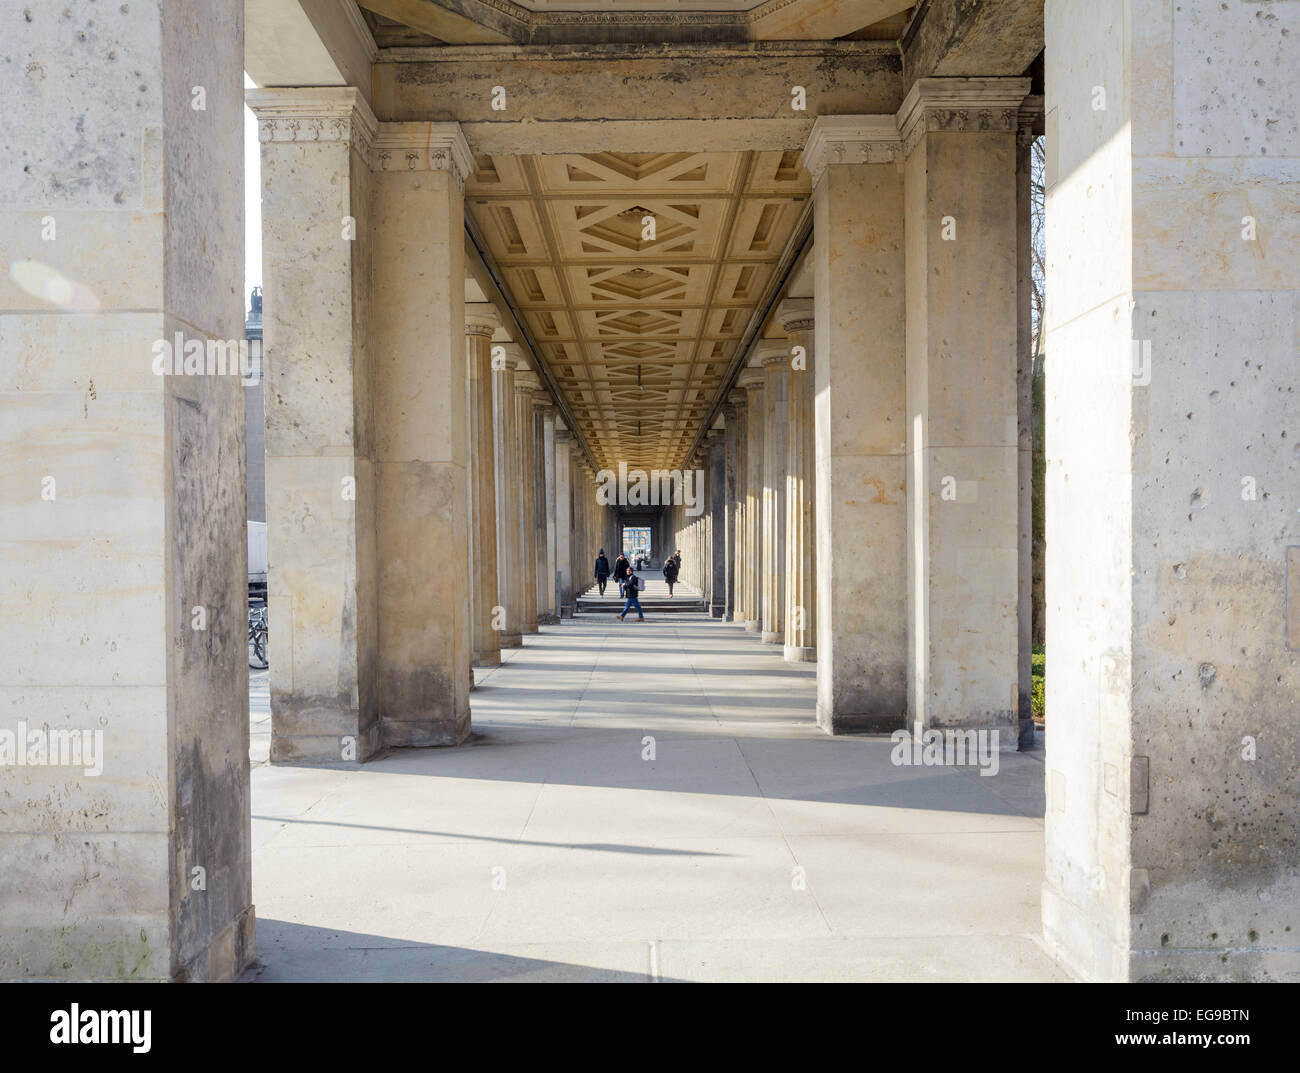 Colonnade by Alte Nationalgalerie, Berlin, Germany Stock Photo